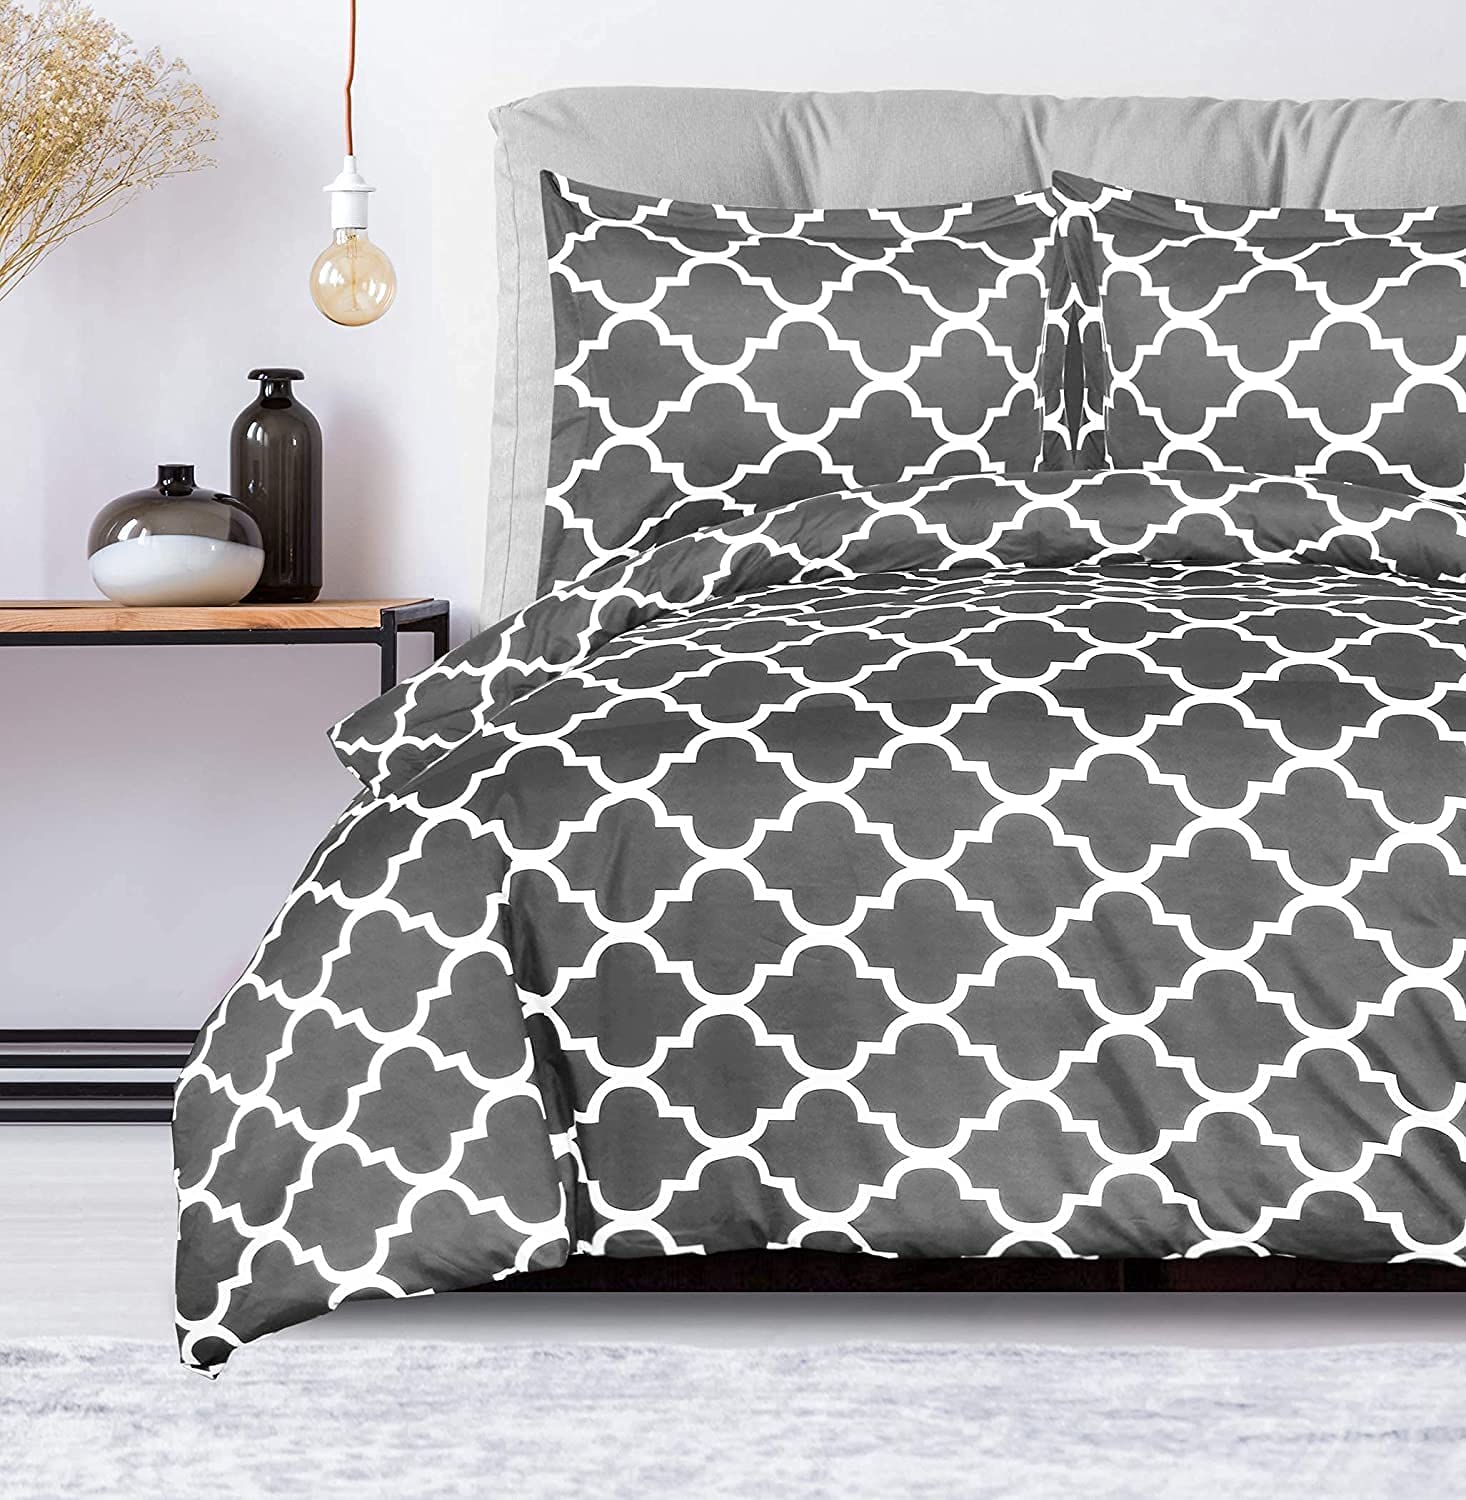  Utopia Bedding Set - 1 Duvet Cover with 2 Pillow Shams - 3  Pieces Comforter Cover with Zipper Closure - Ultra Soft Brushed Microfiber,  90 X 90 Inches (Queen, Quatrefoil Navy) : Home & Kitchen